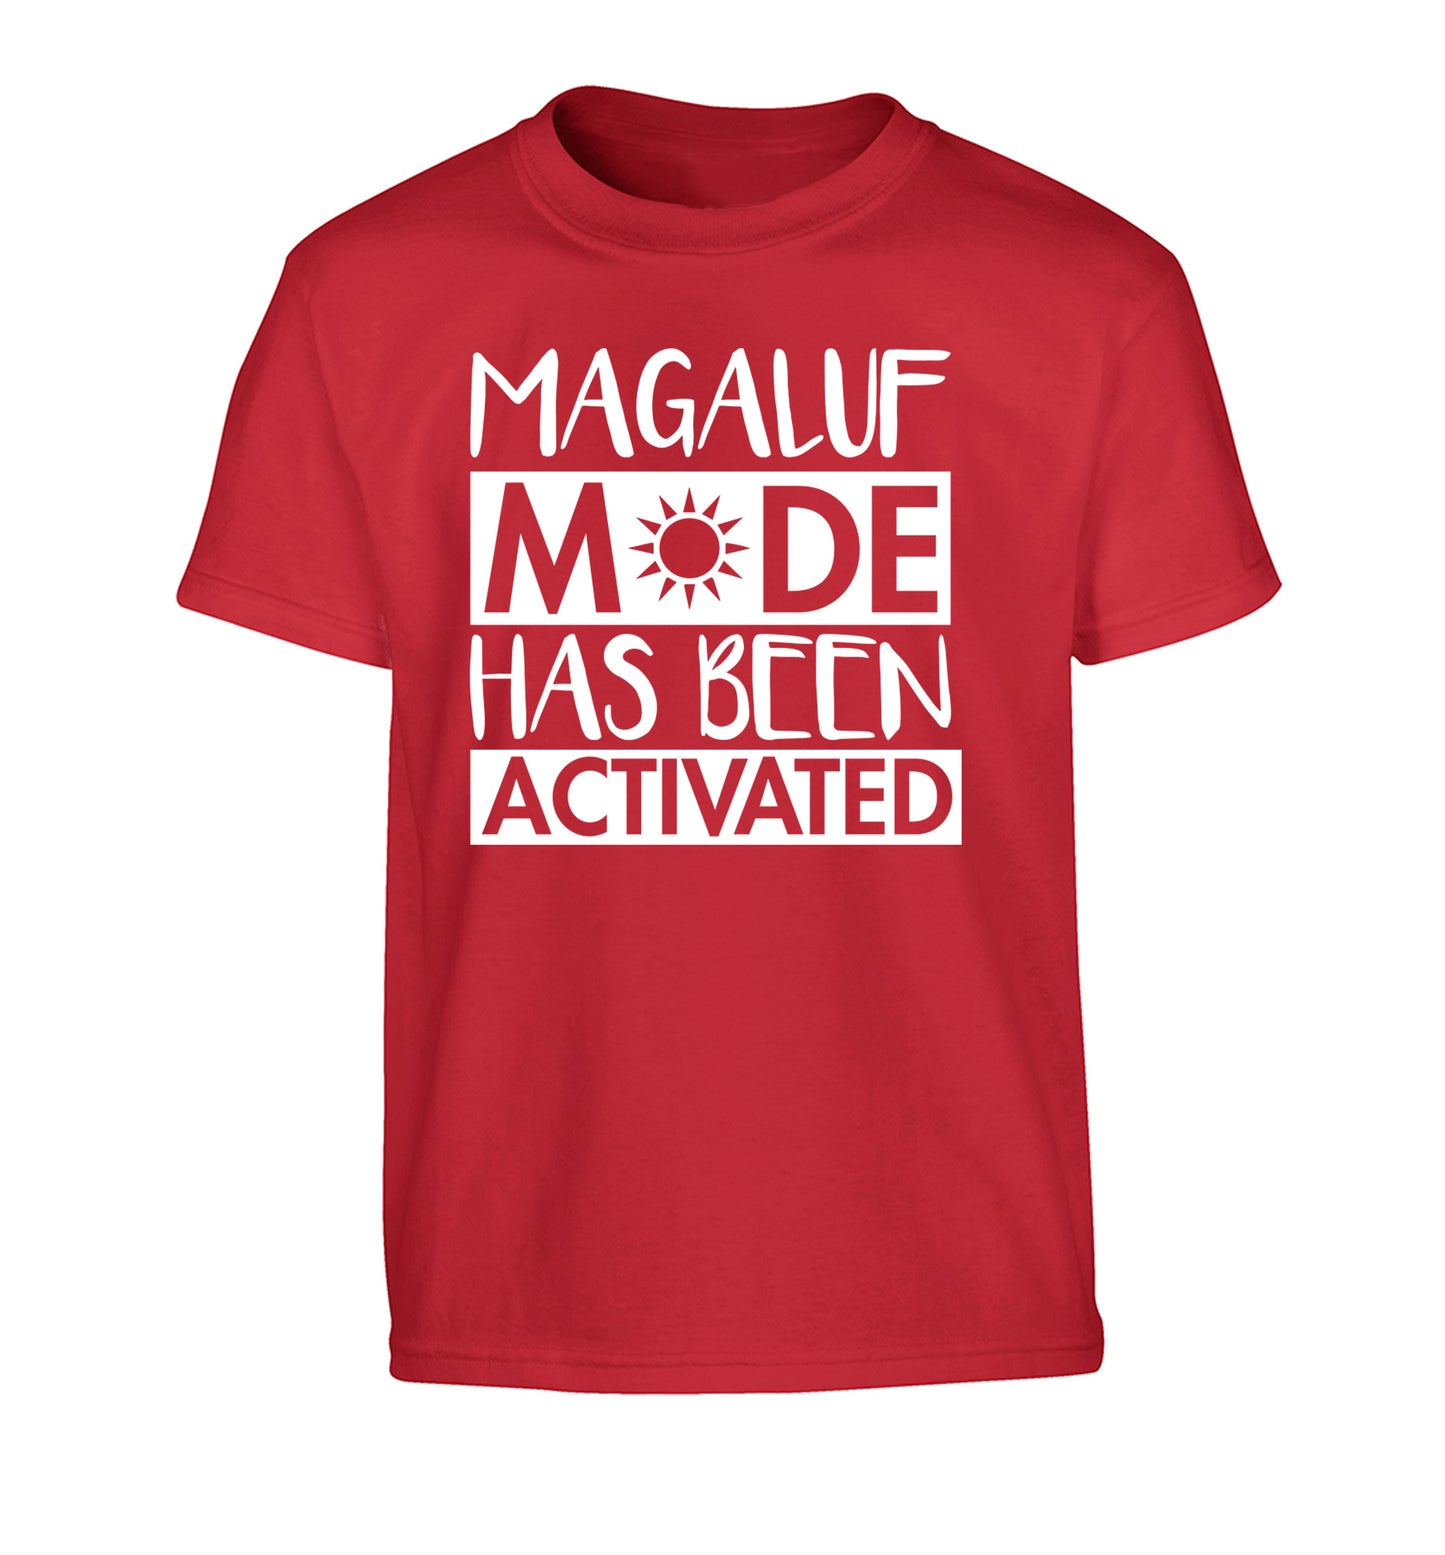 Magaluf mode has been activated Children's red Tshirt 12-13 Years